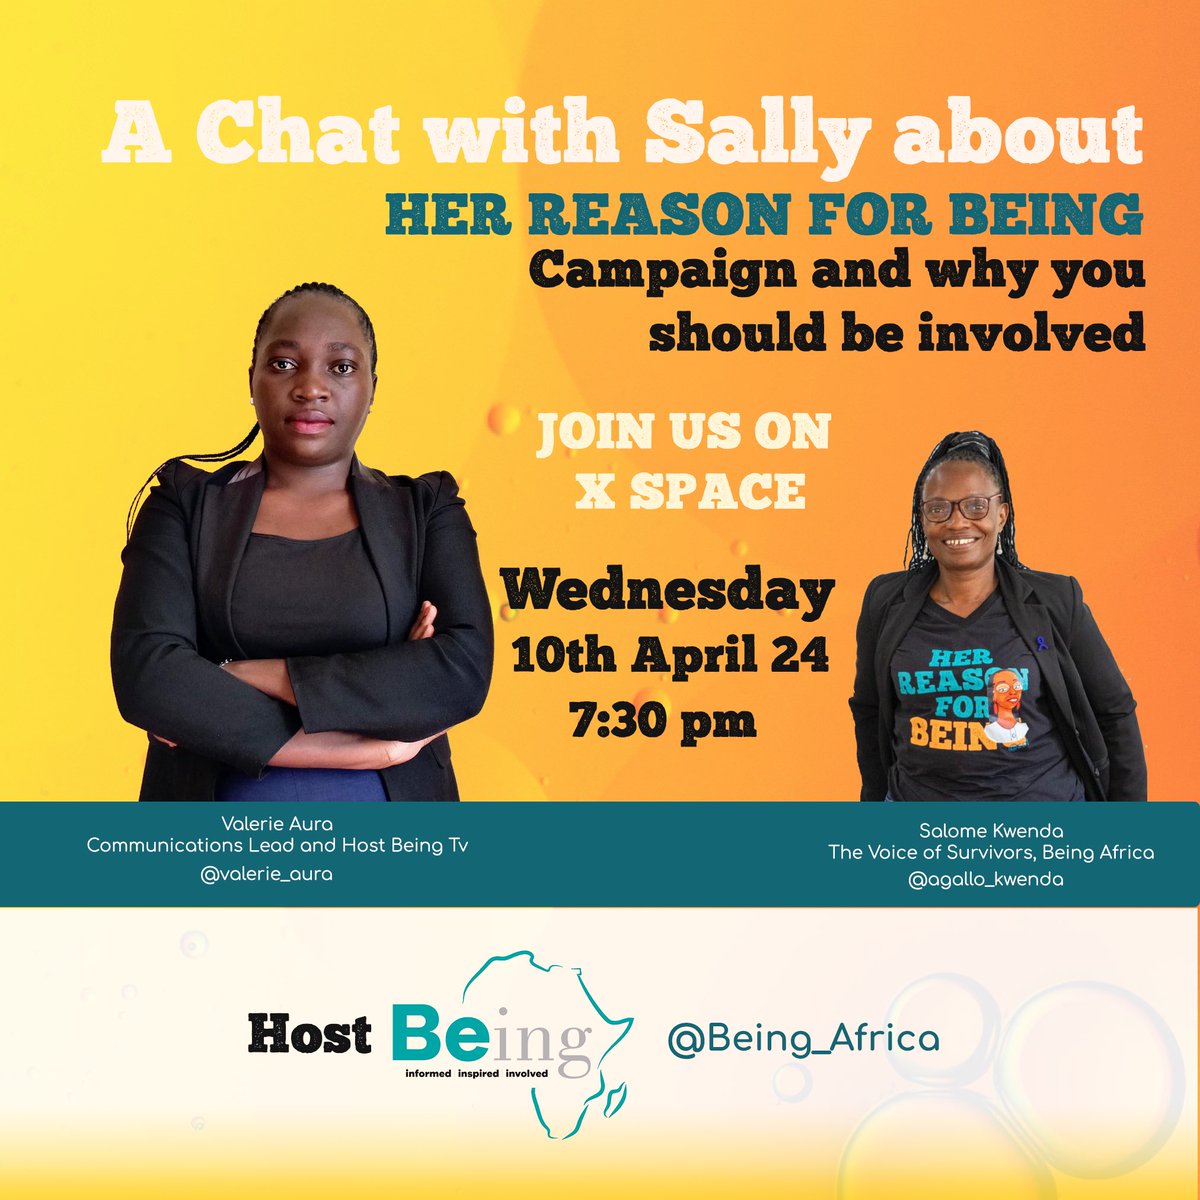 Happy Idd ul-Fitr Everyone, Today is Wednesday. It’s #HerReasonForBeing Day 😊 Join us today at 7:30 pm on @XSpaces where we take a deep dive into why #CervicalCancer should be everyone’s business. @valerie_aura @agallo_kwenda Link 👉🏾twitter.com/i/spaces/1ZkJz… @IGCSociety @uicc